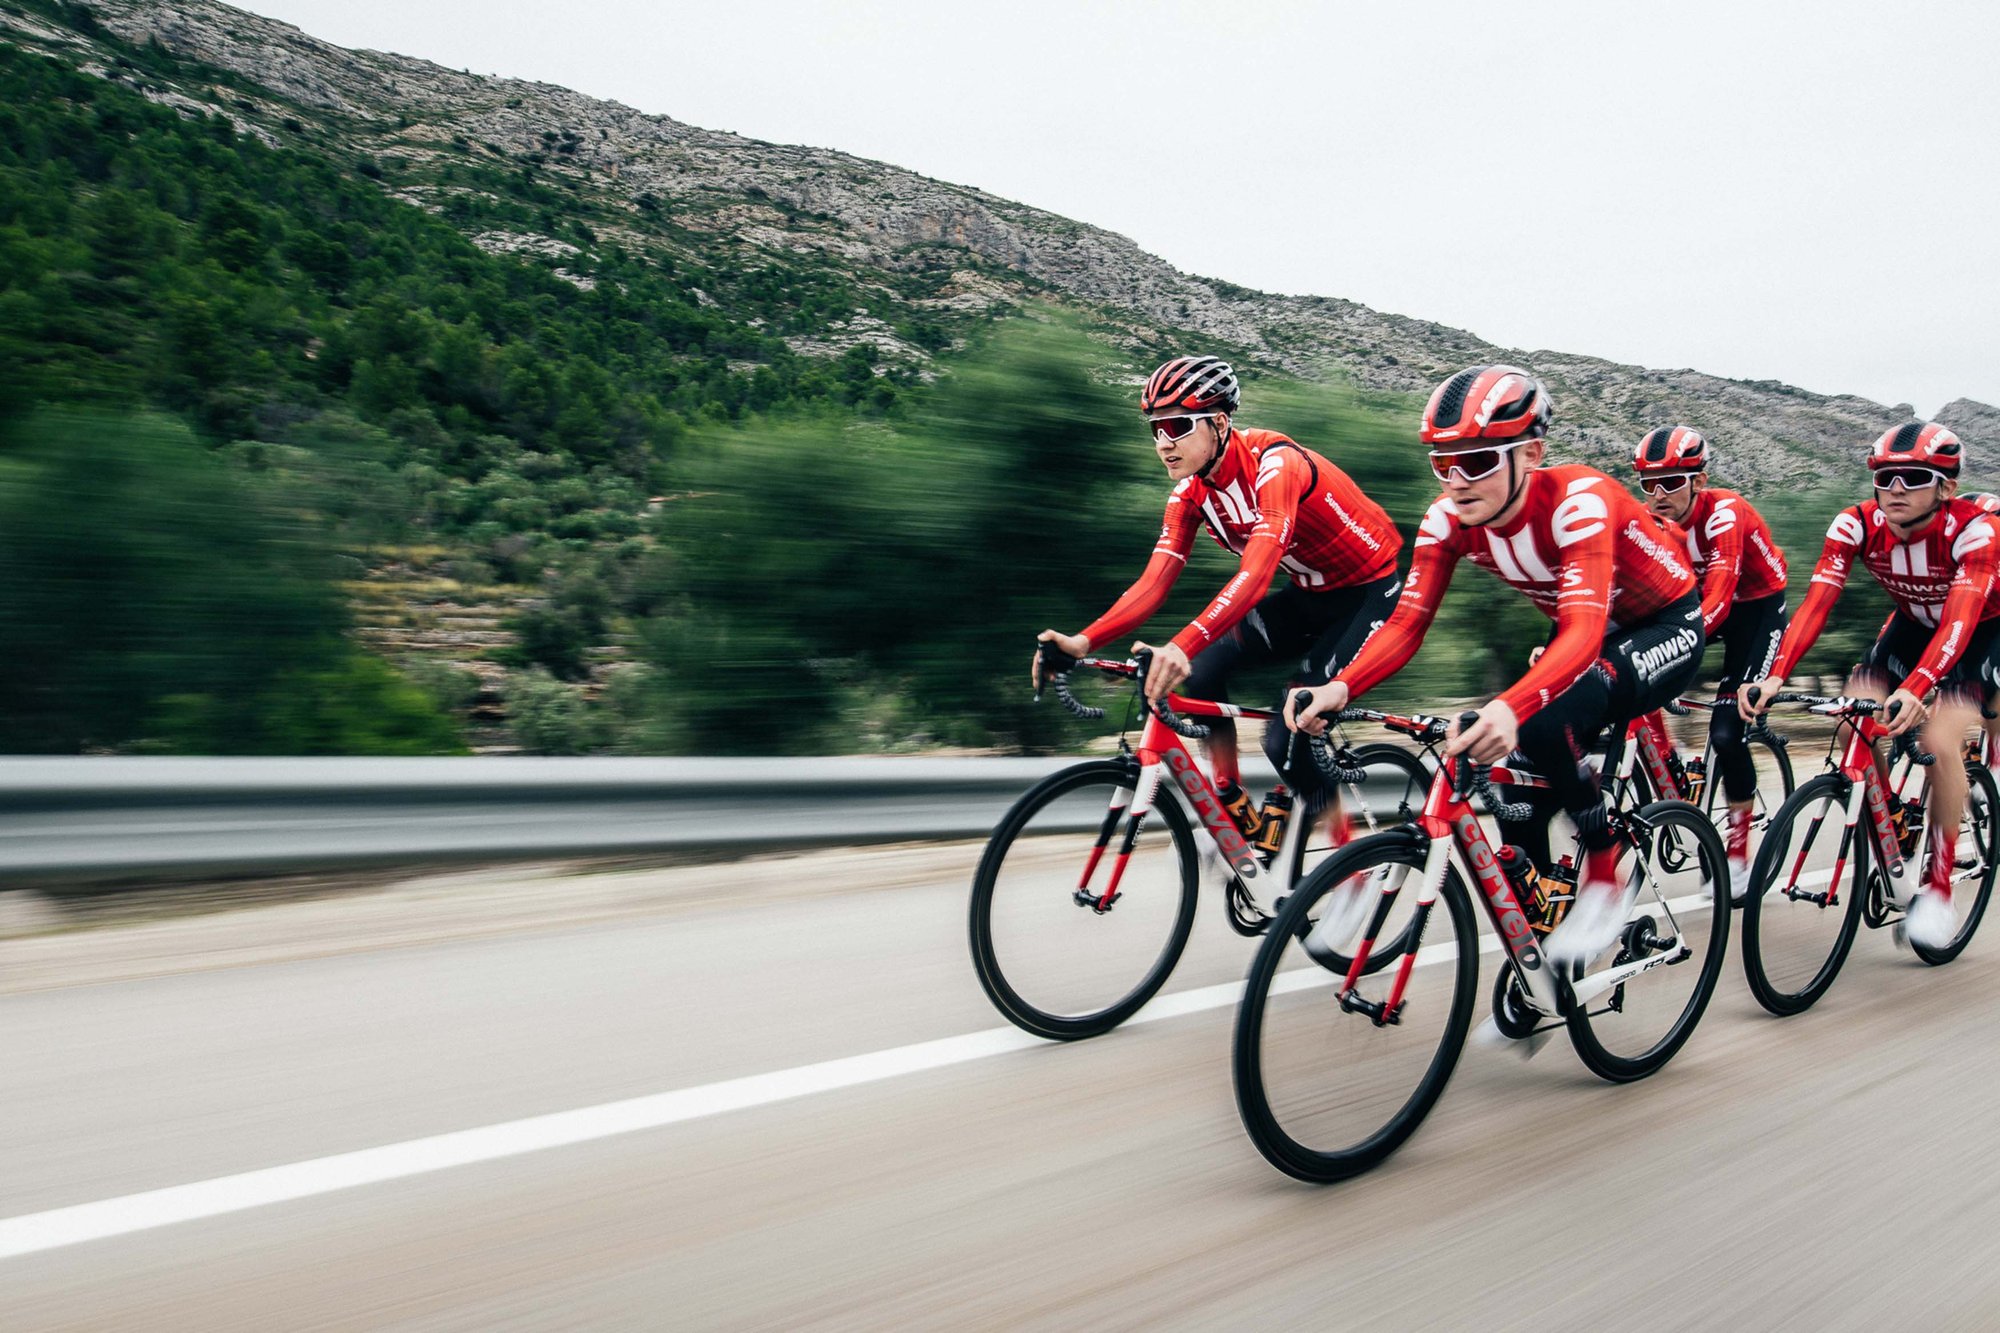 Cyclists Team Sunweb in action with Shimano